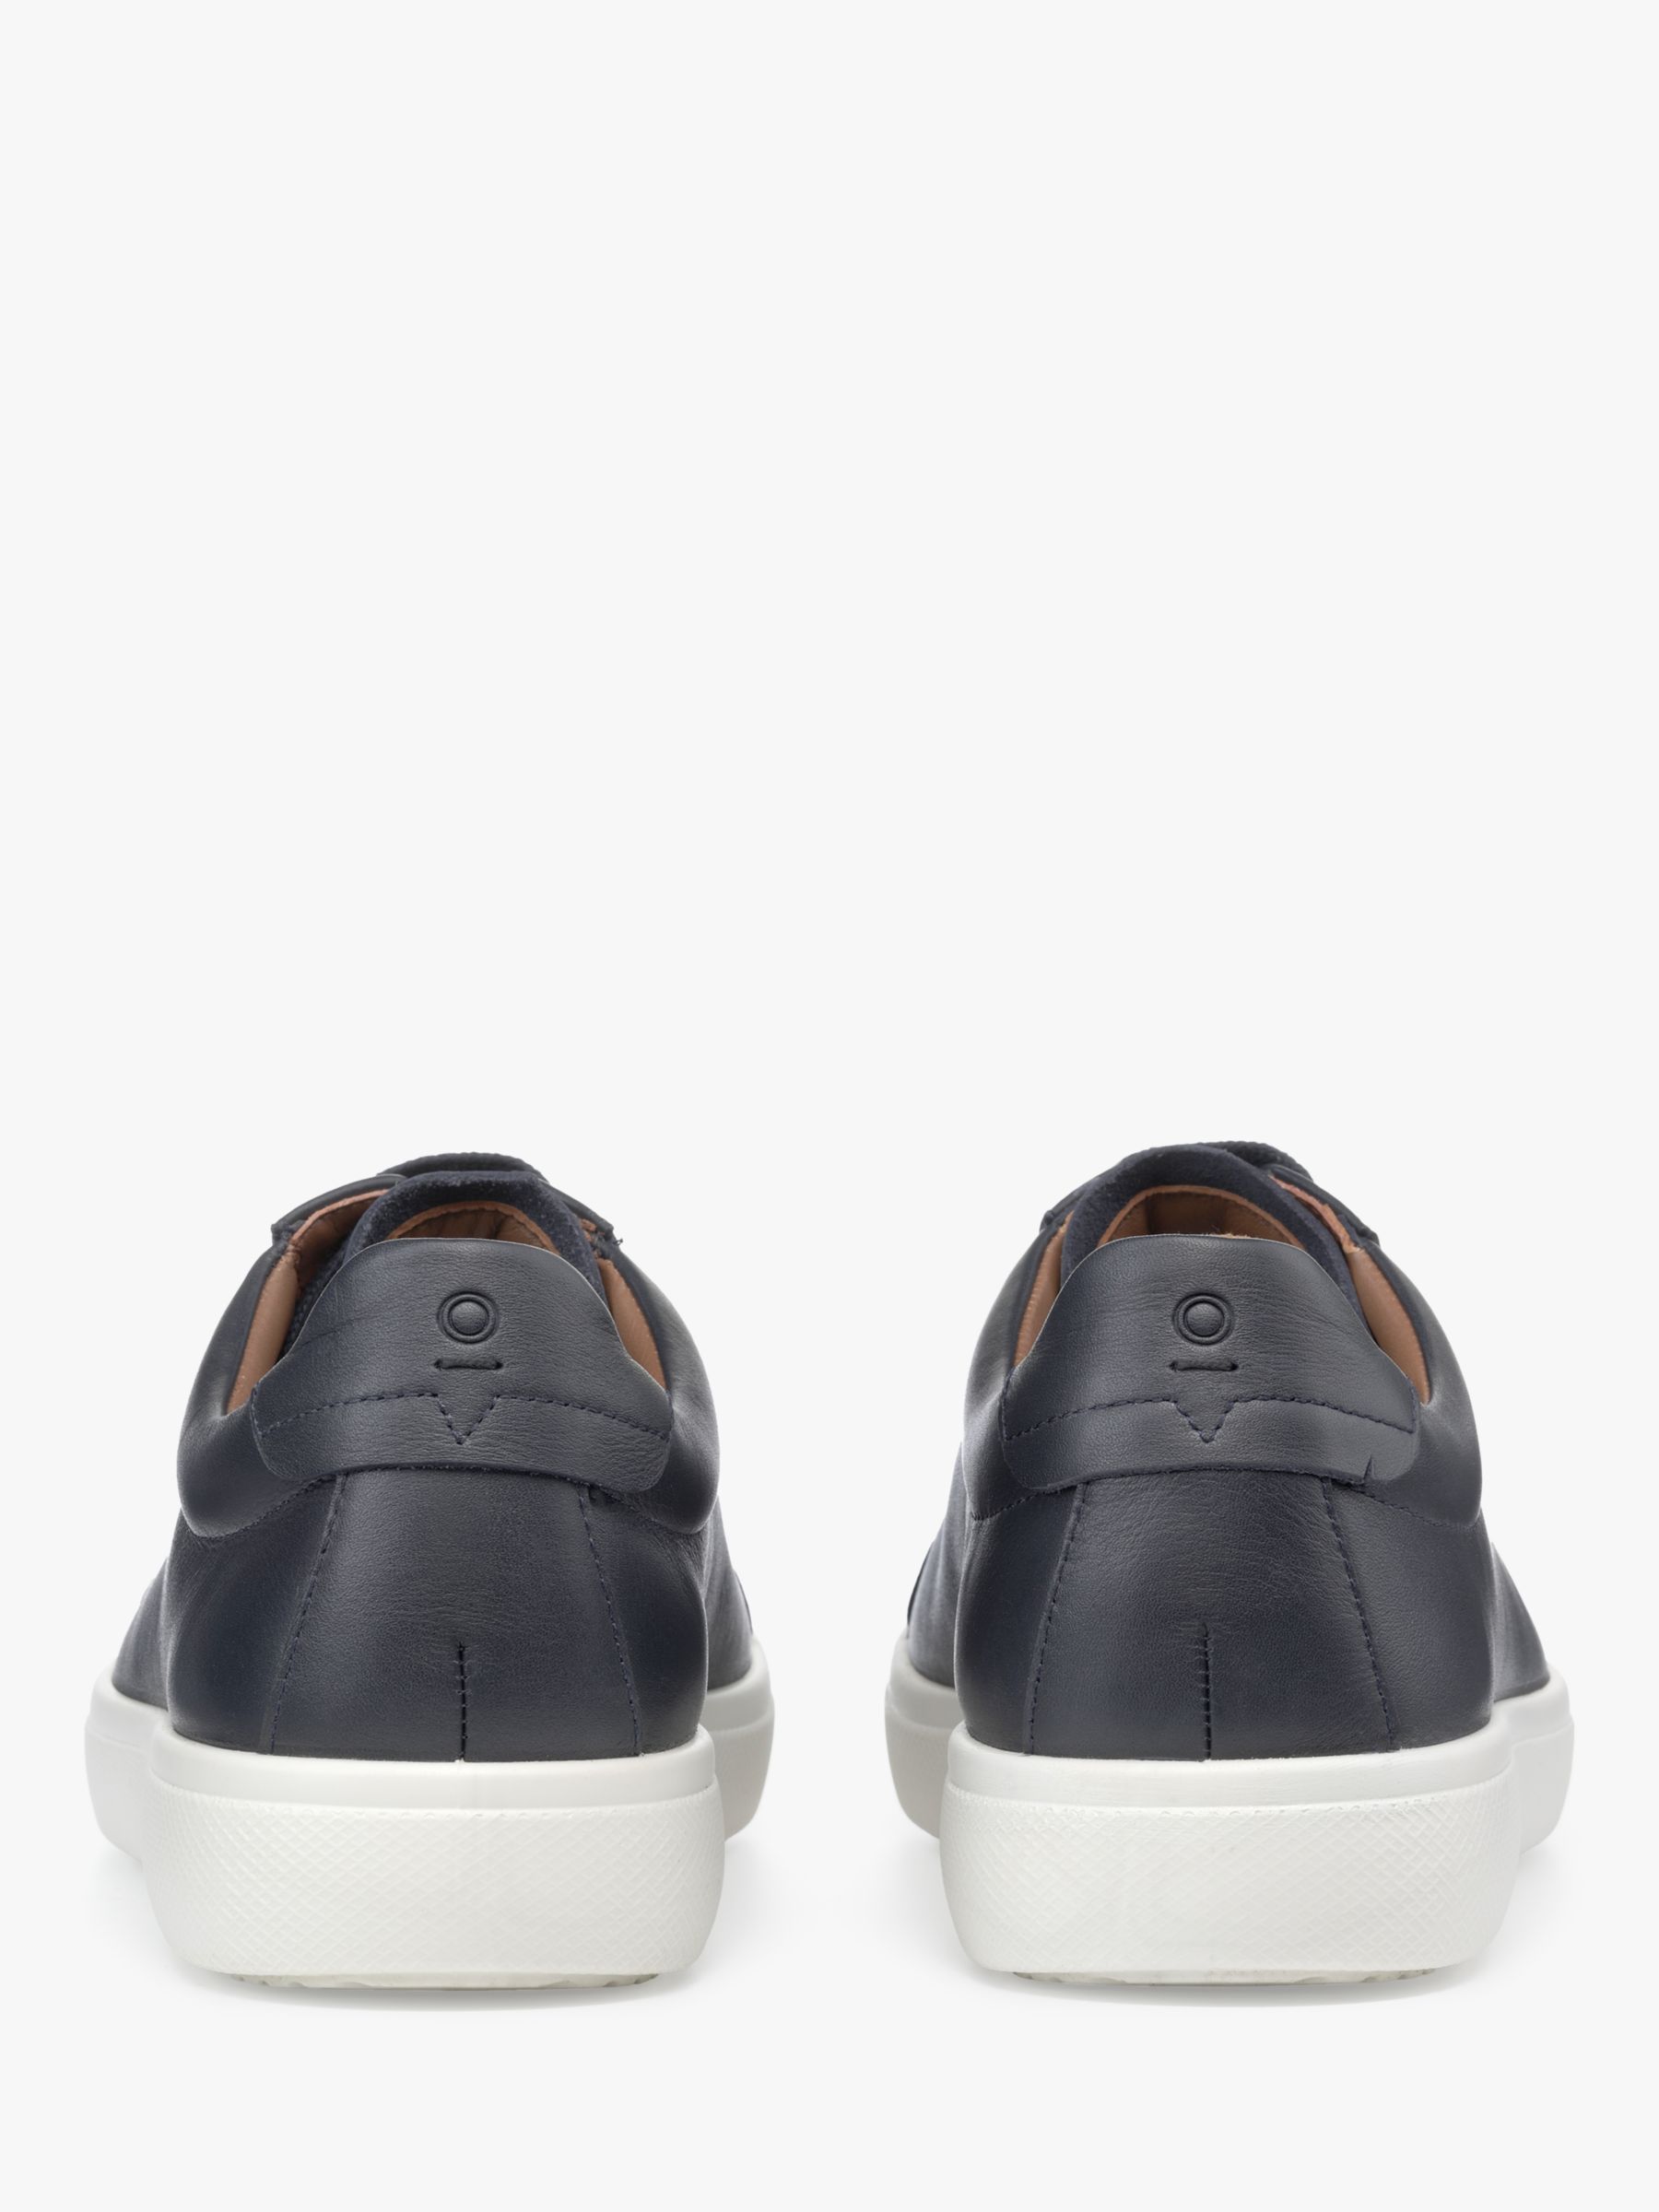 Hotter Oliver Classic Leather Trainers, Navy, 8.5